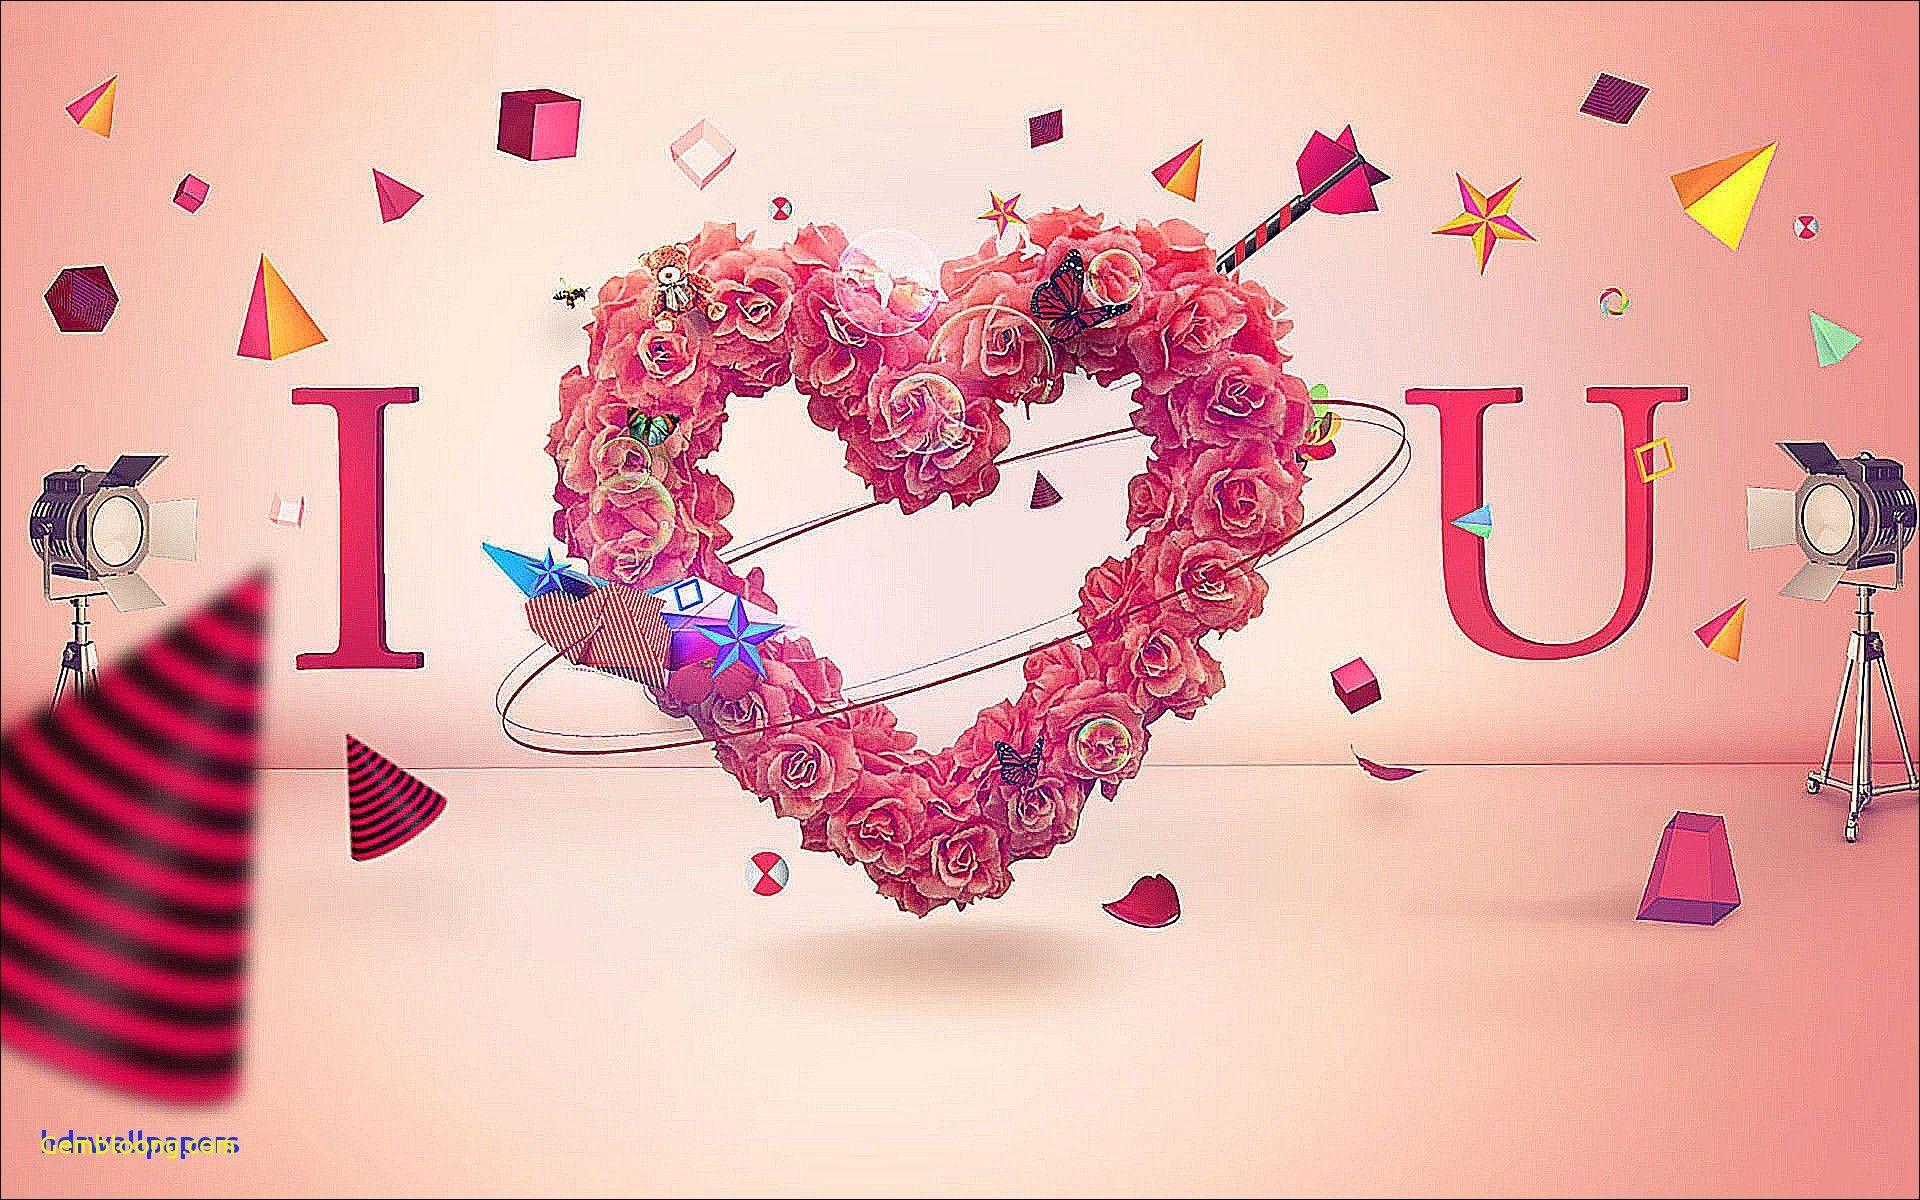 Amazing I Love You Wallpaper Awesome Best 3D Wallpaper HD Love Hdr